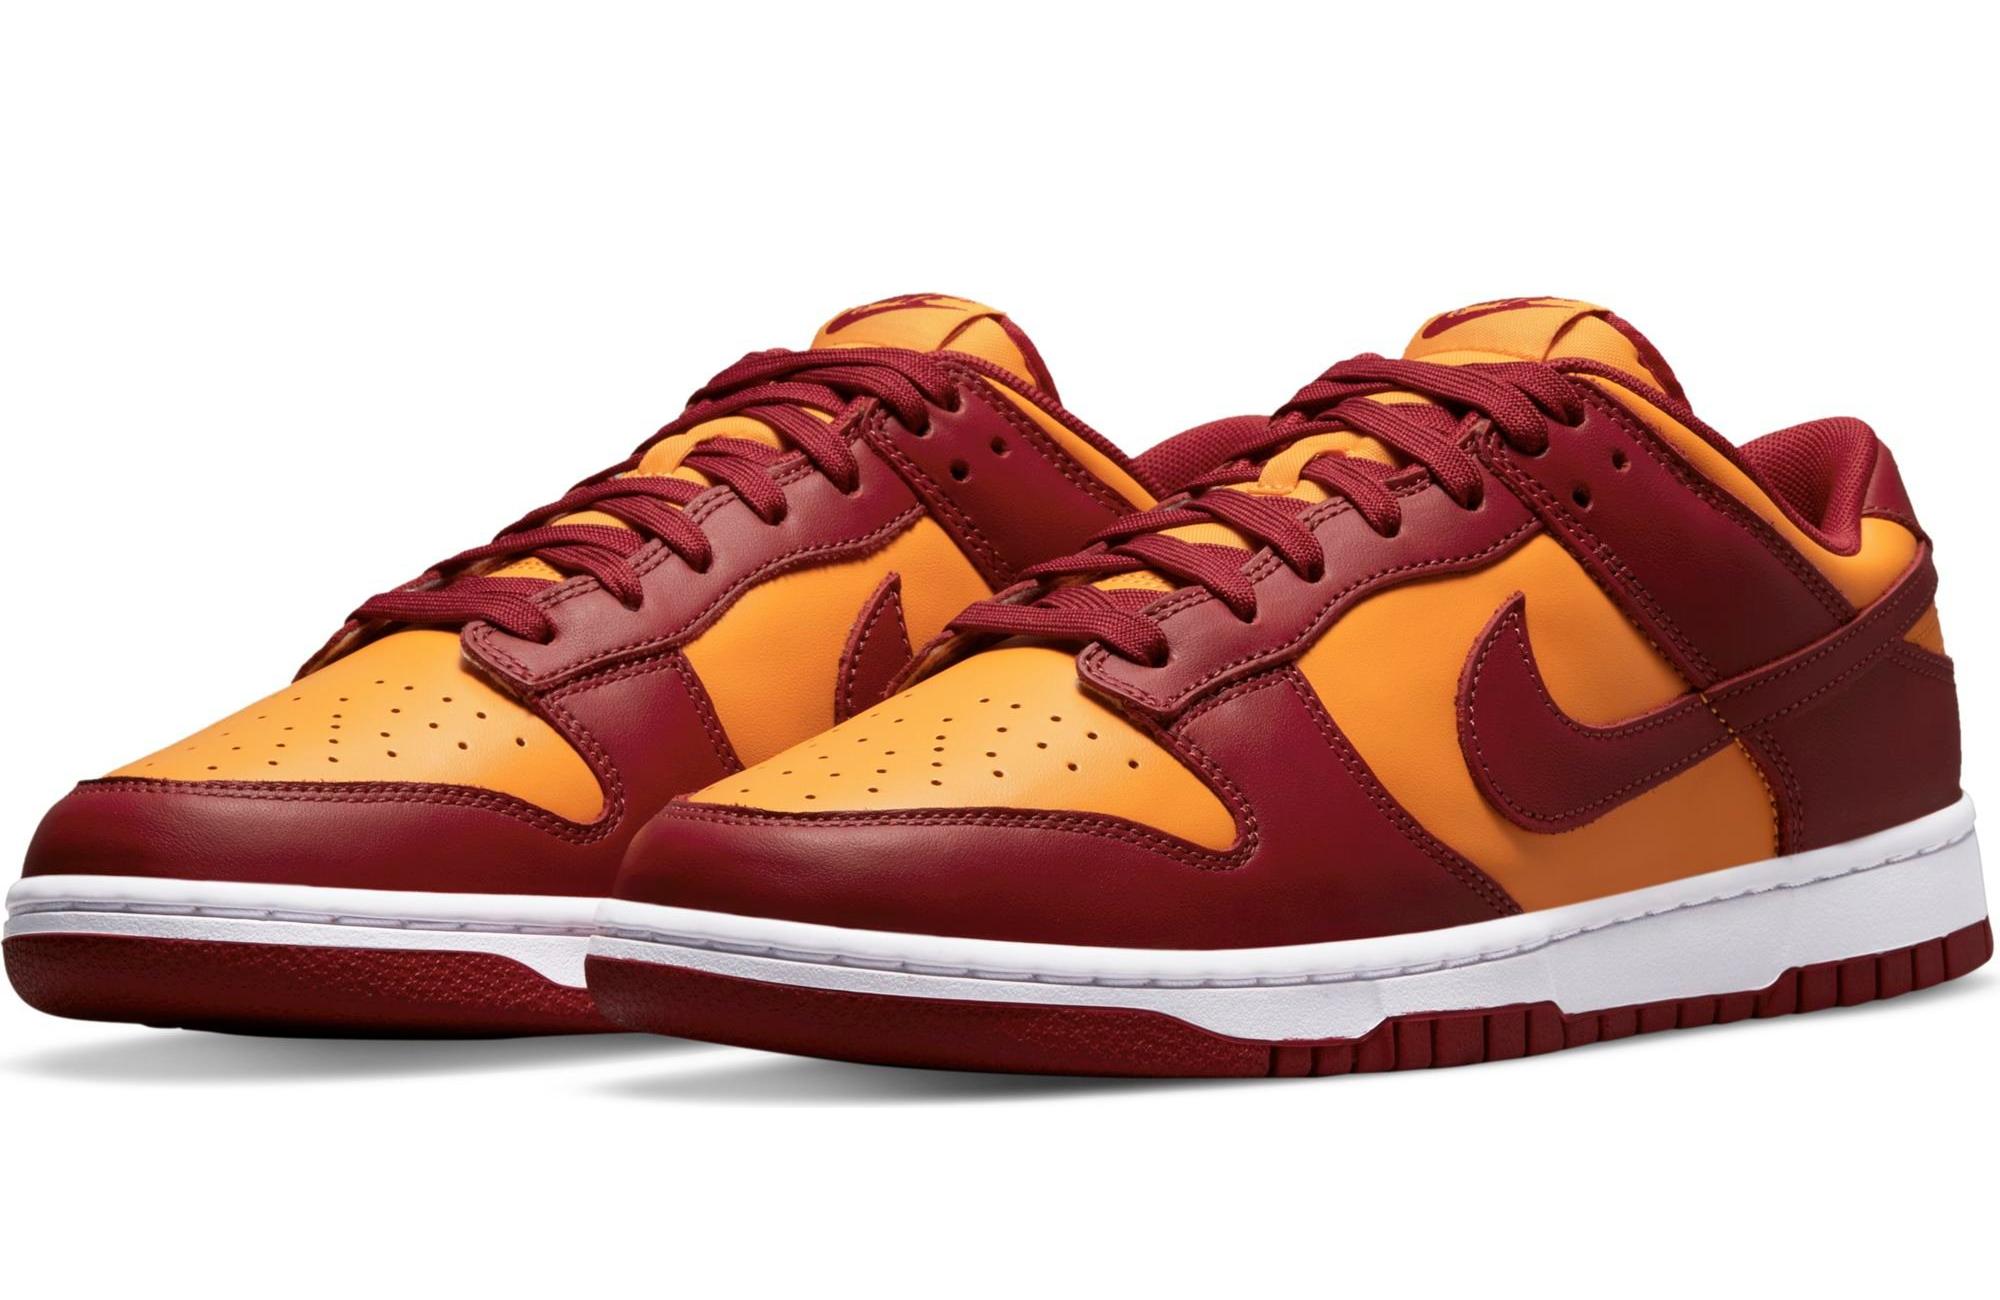 Sneakers Release – Nike Dunk Low Retro “Midas Gold